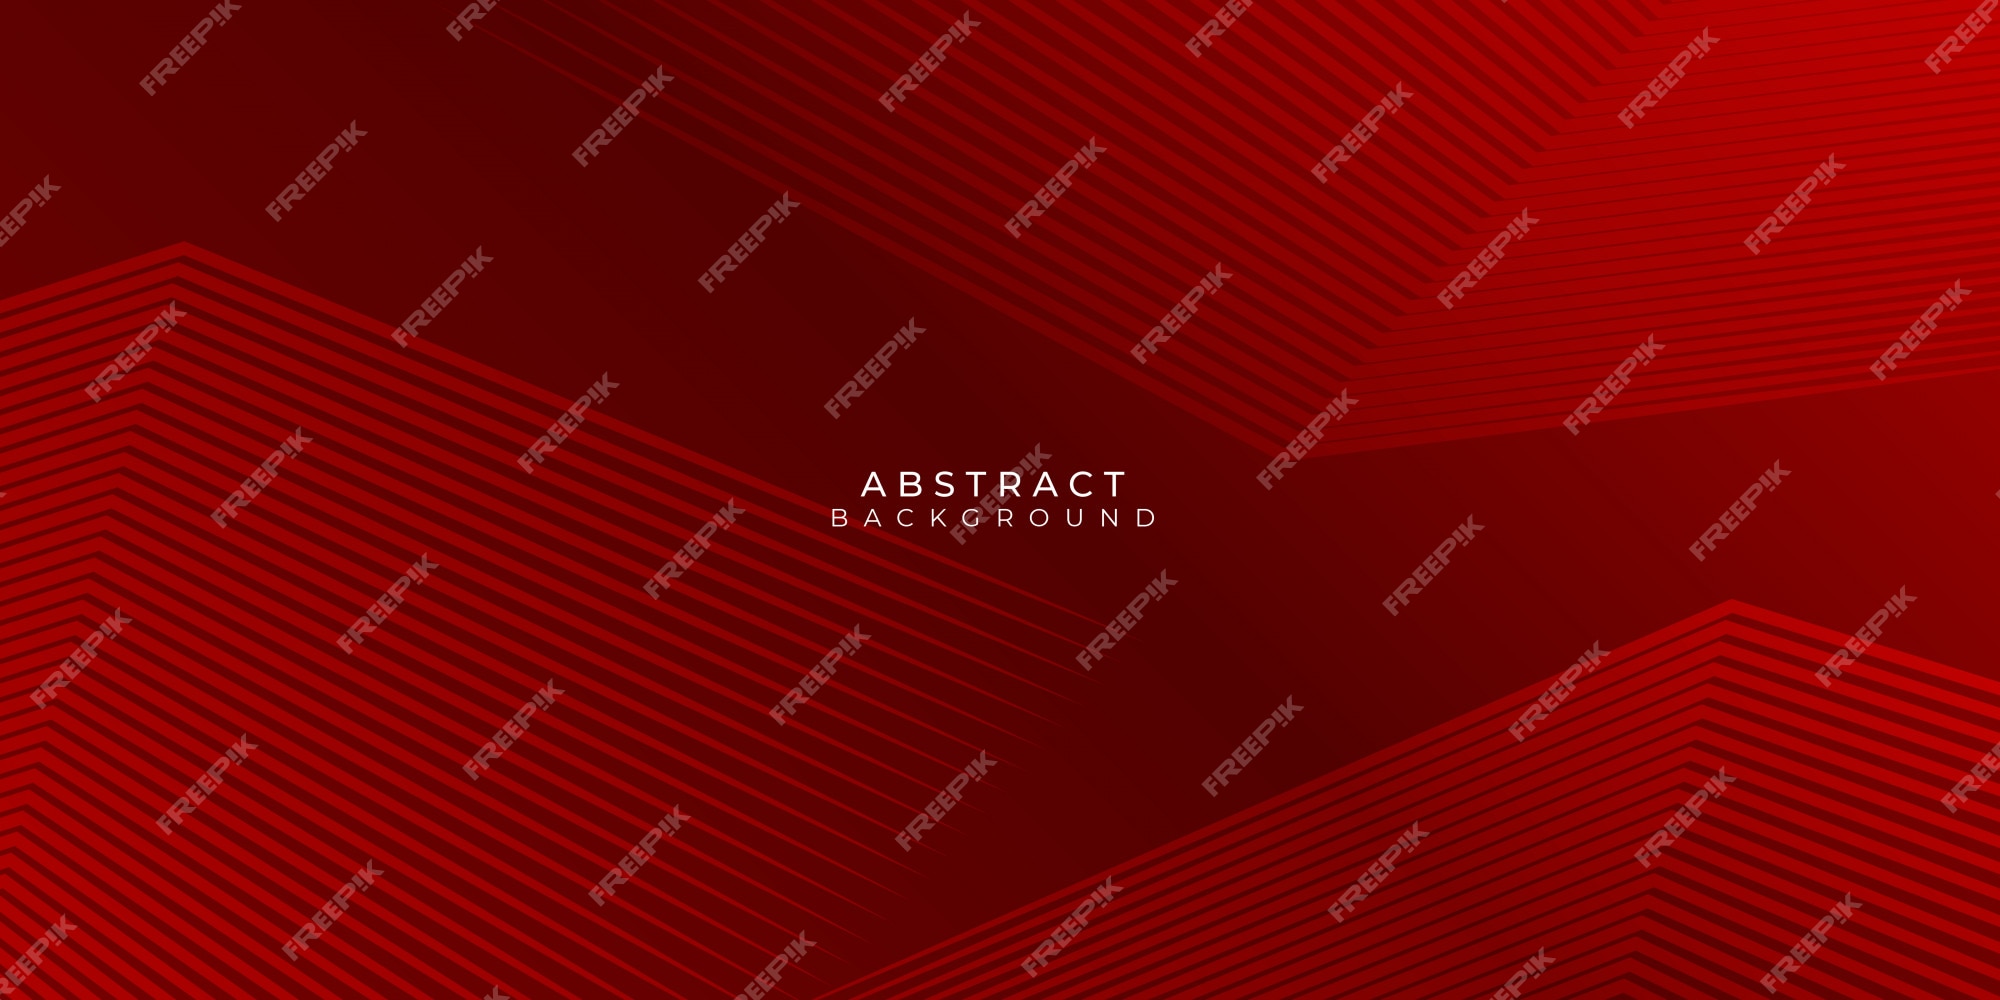 Premium Vector | Dark red lines neutral abstract background